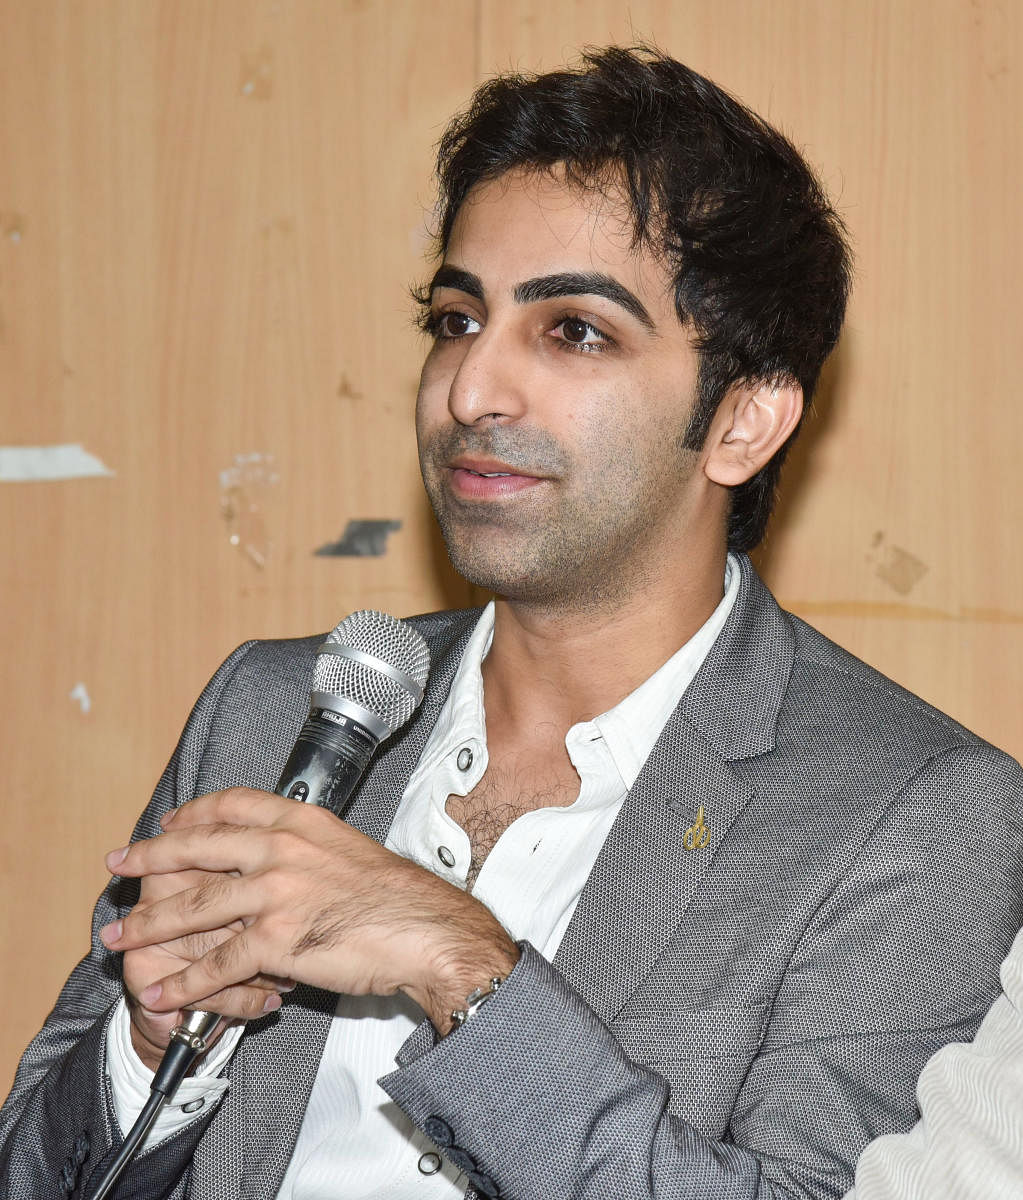 different strokes Still an active player, Pankaj Advani has also taken up the role of the joint-secretary of the Karnataka State Billiards Association. DH photo/ s k dinesh